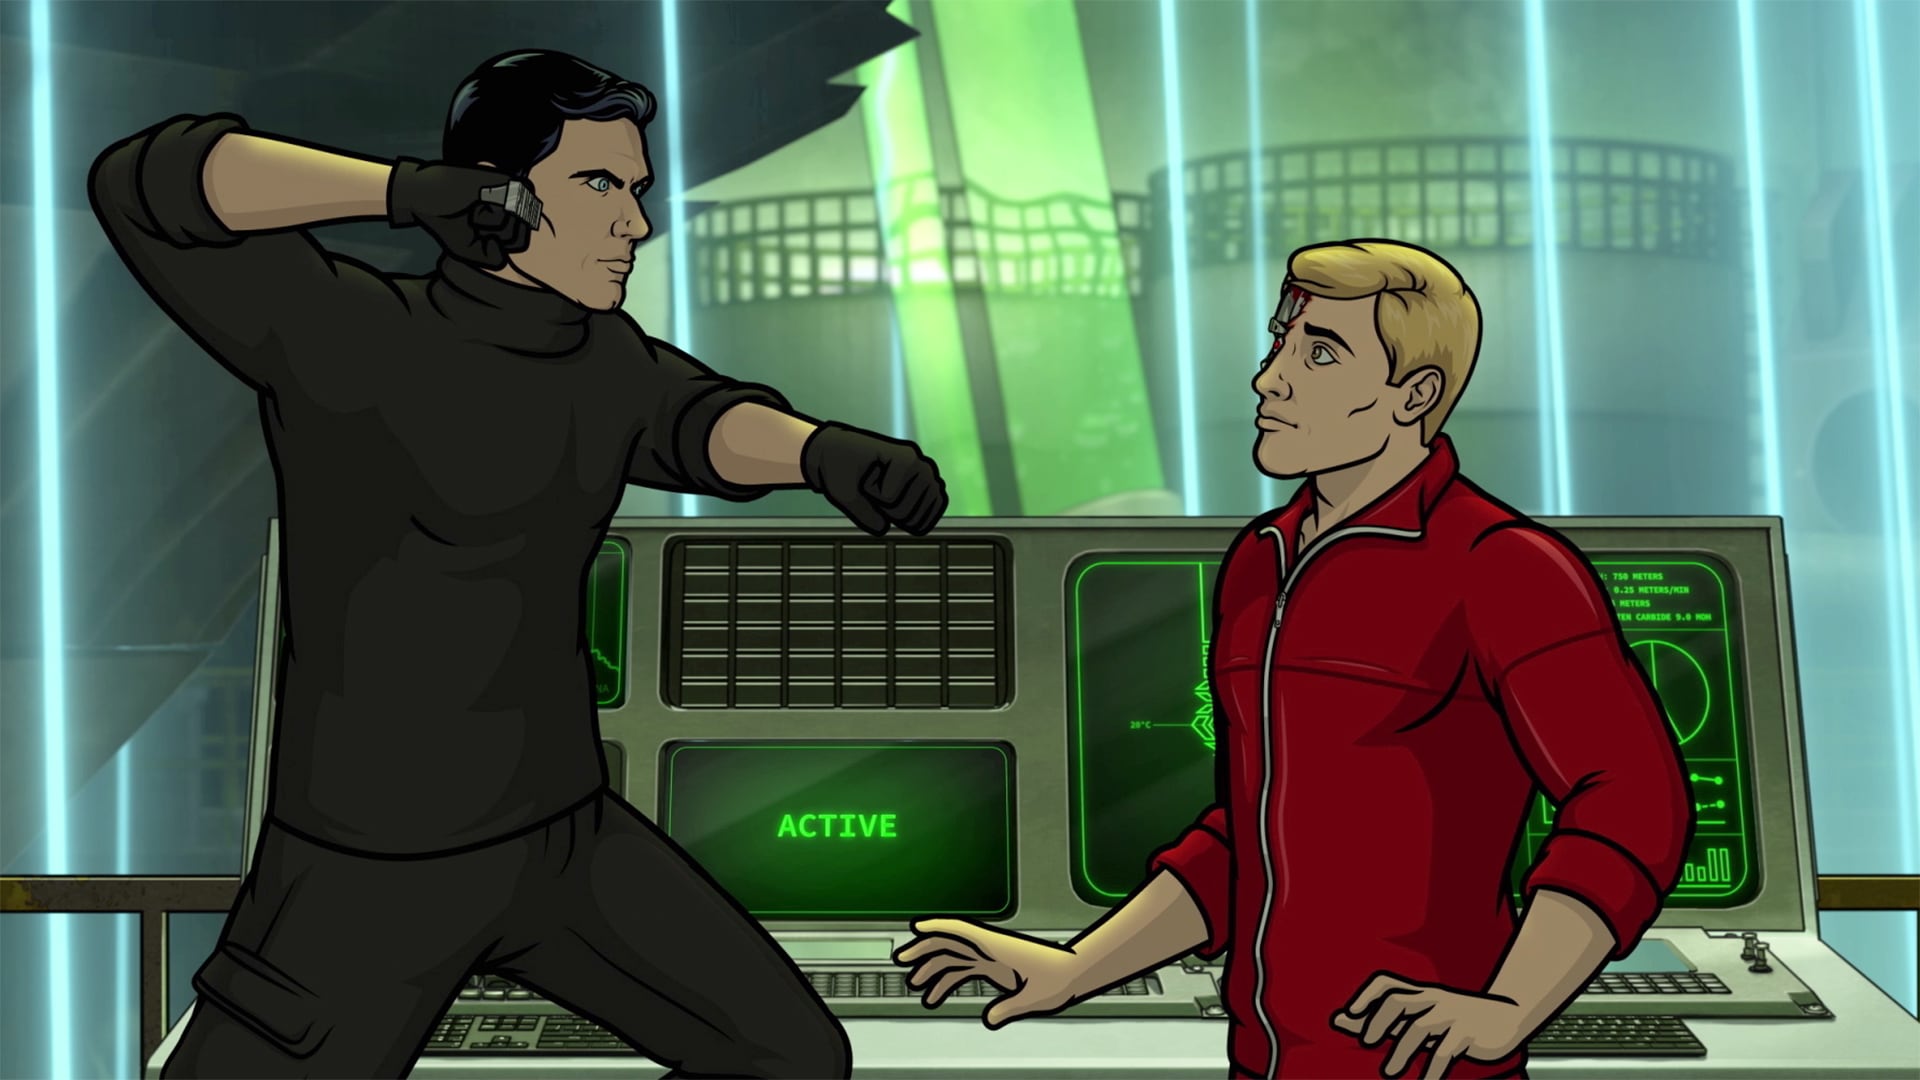 Archer dressed in black about to punch someone in a red jump suit.